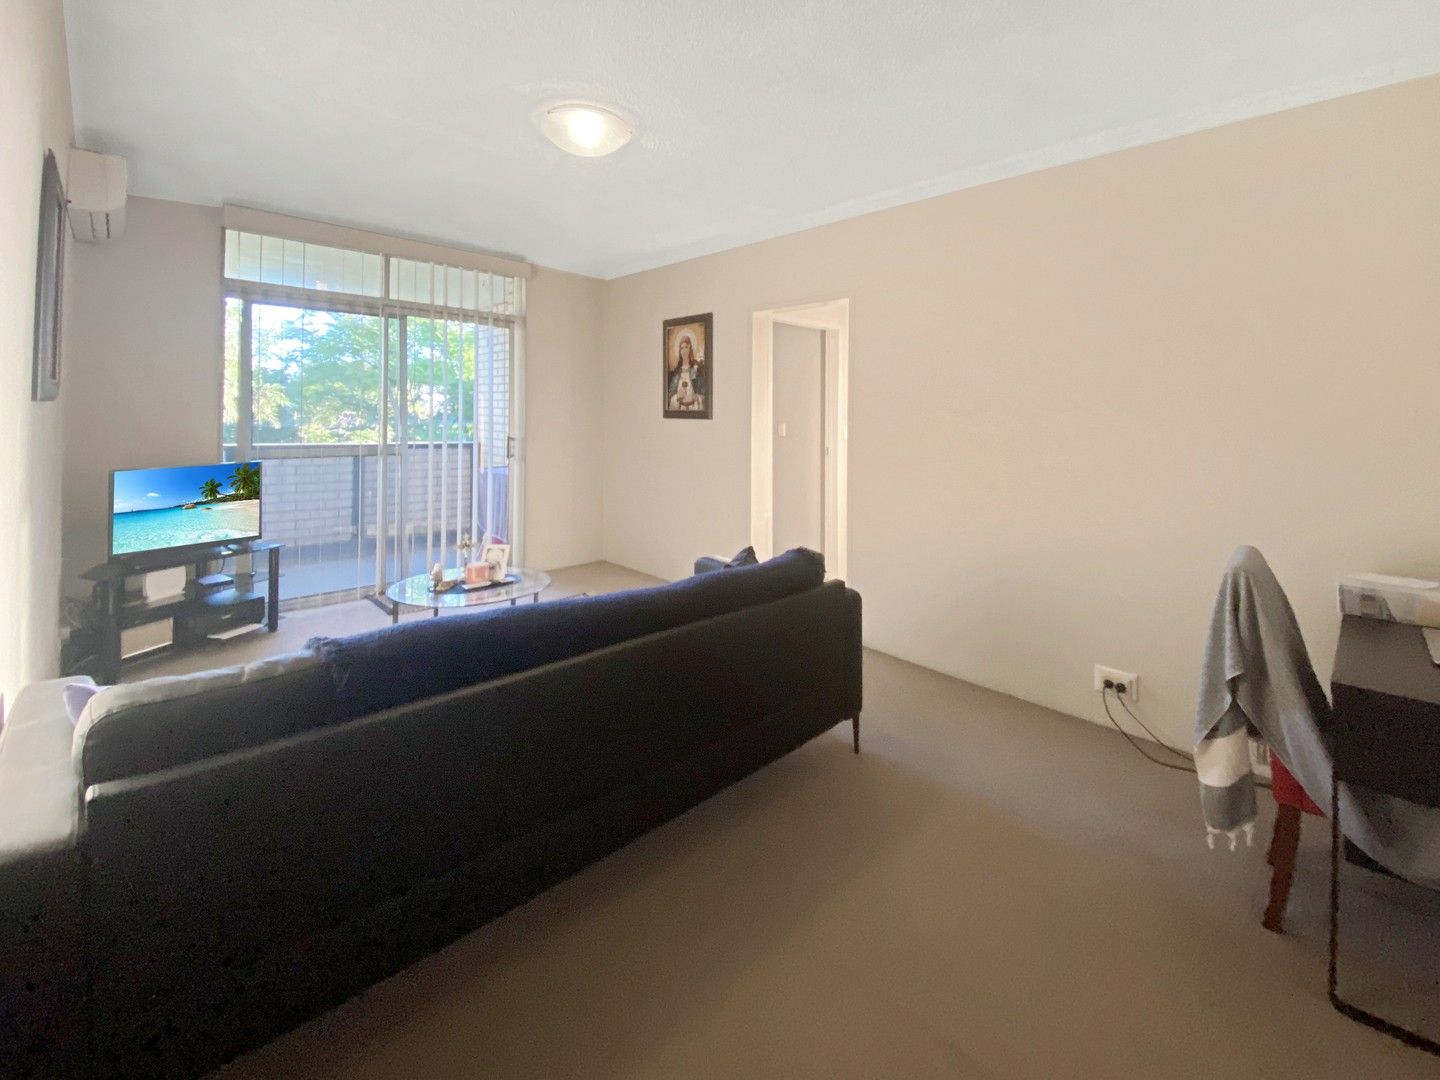 2 bedrooms Apartment / Unit / Flat in 10/529 Victoria Road RYDE NSW, 2112